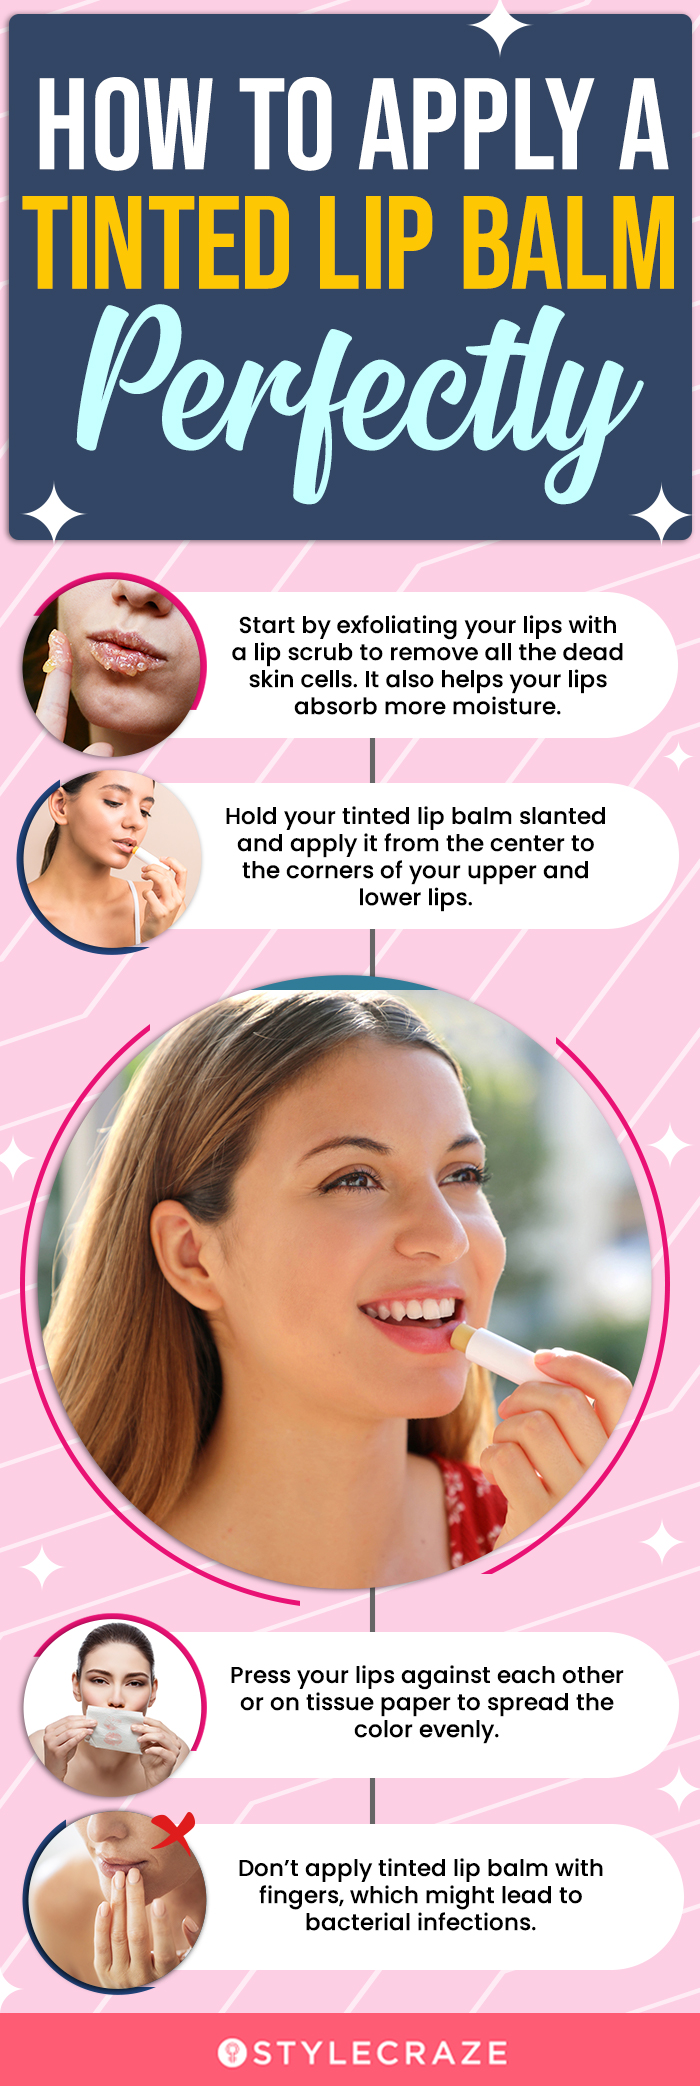 How To Apply A Tinted Lip Balm Perfectly [infographic]